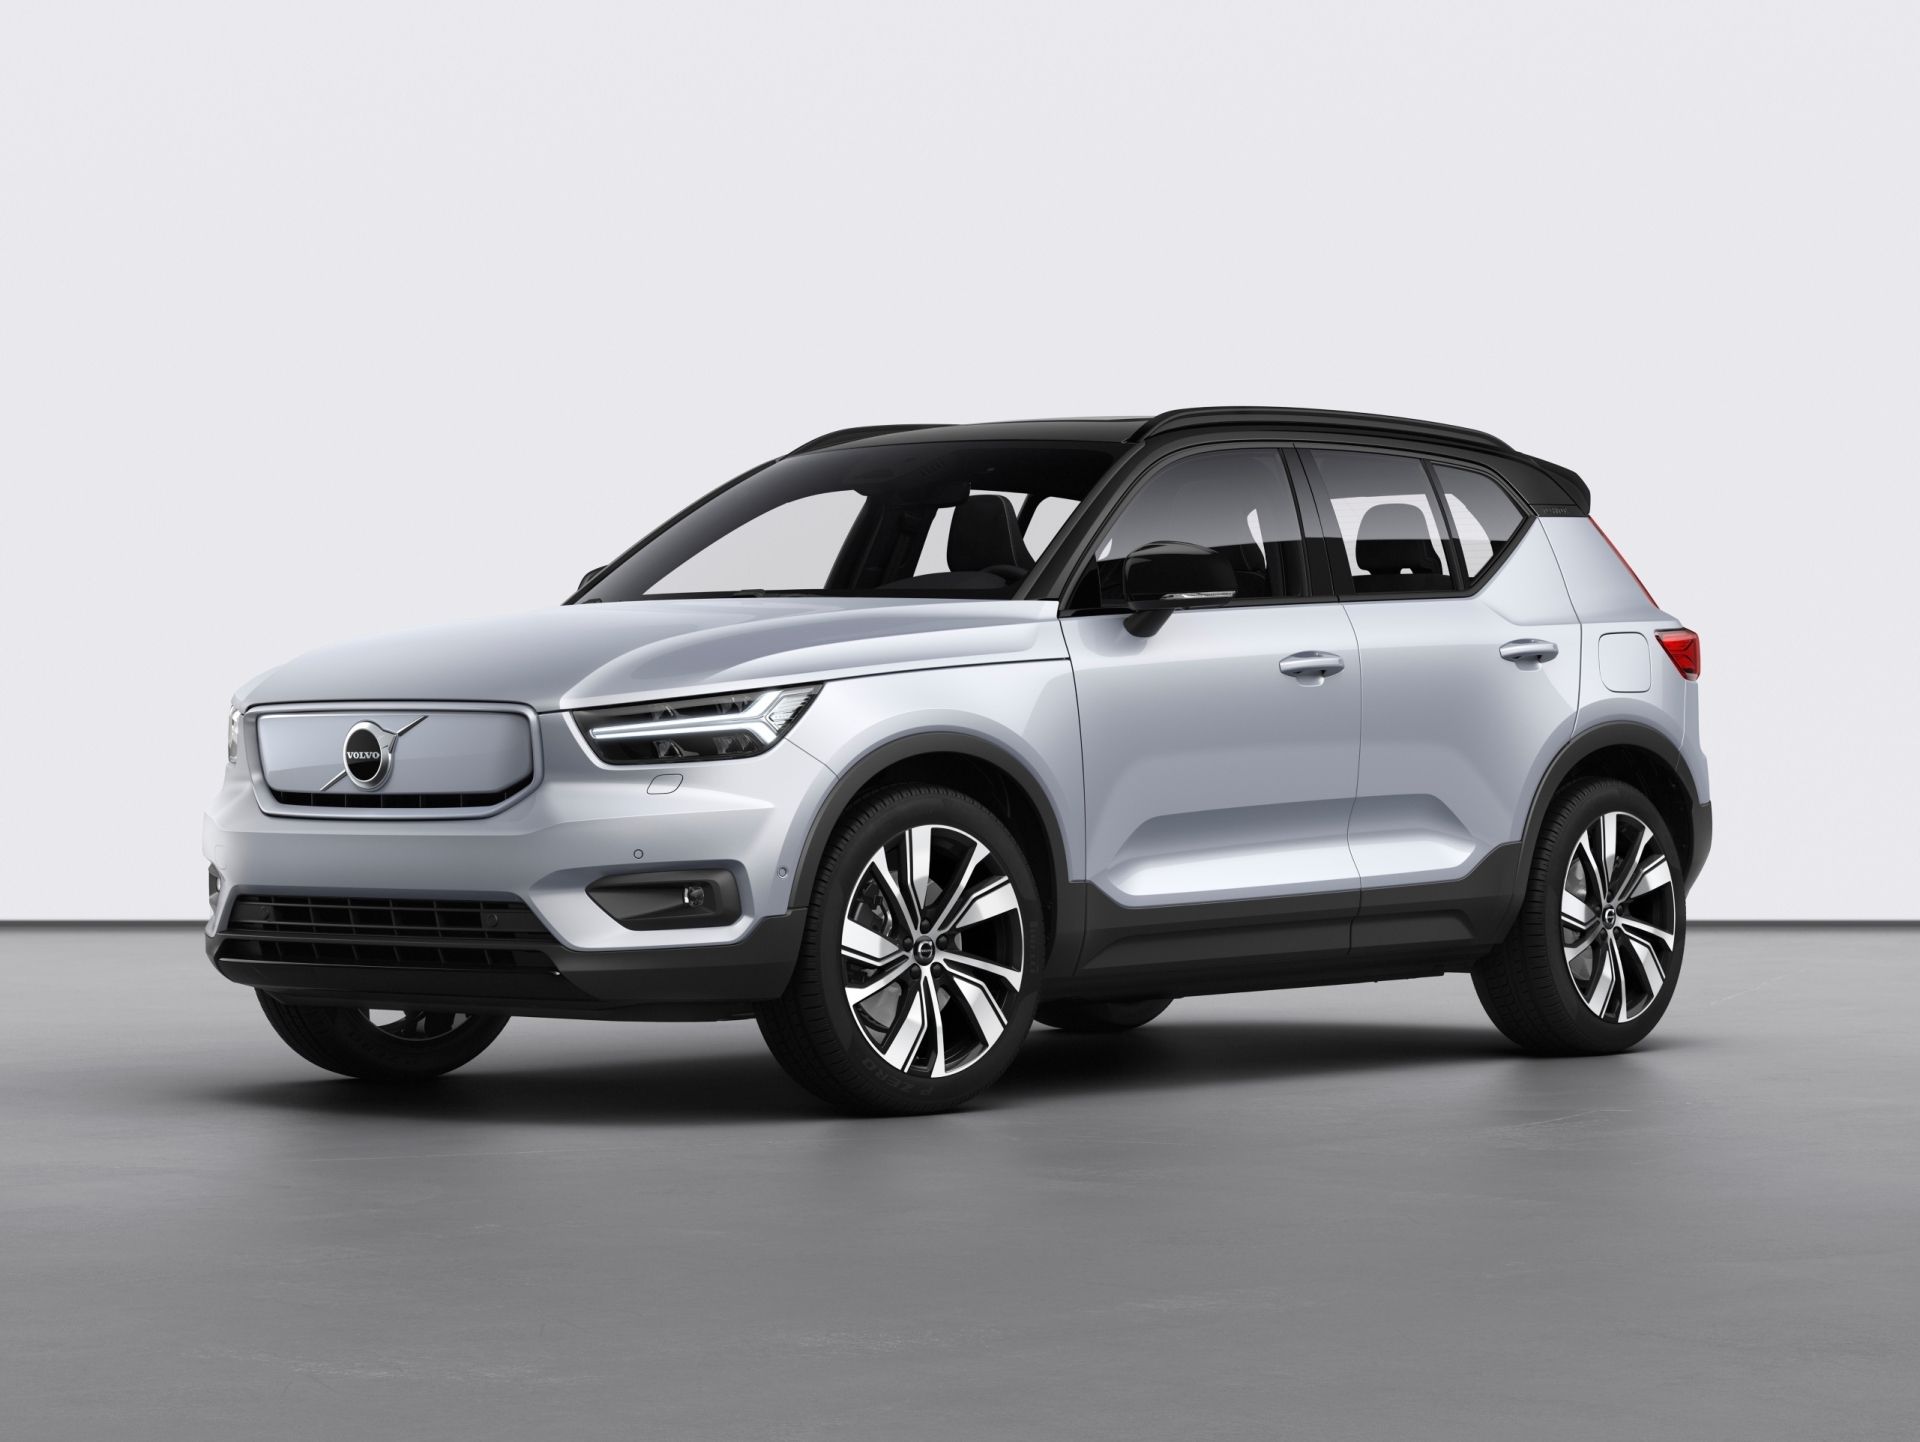 Volvo launches its first fully electric vehicle, the XC40 Recharge